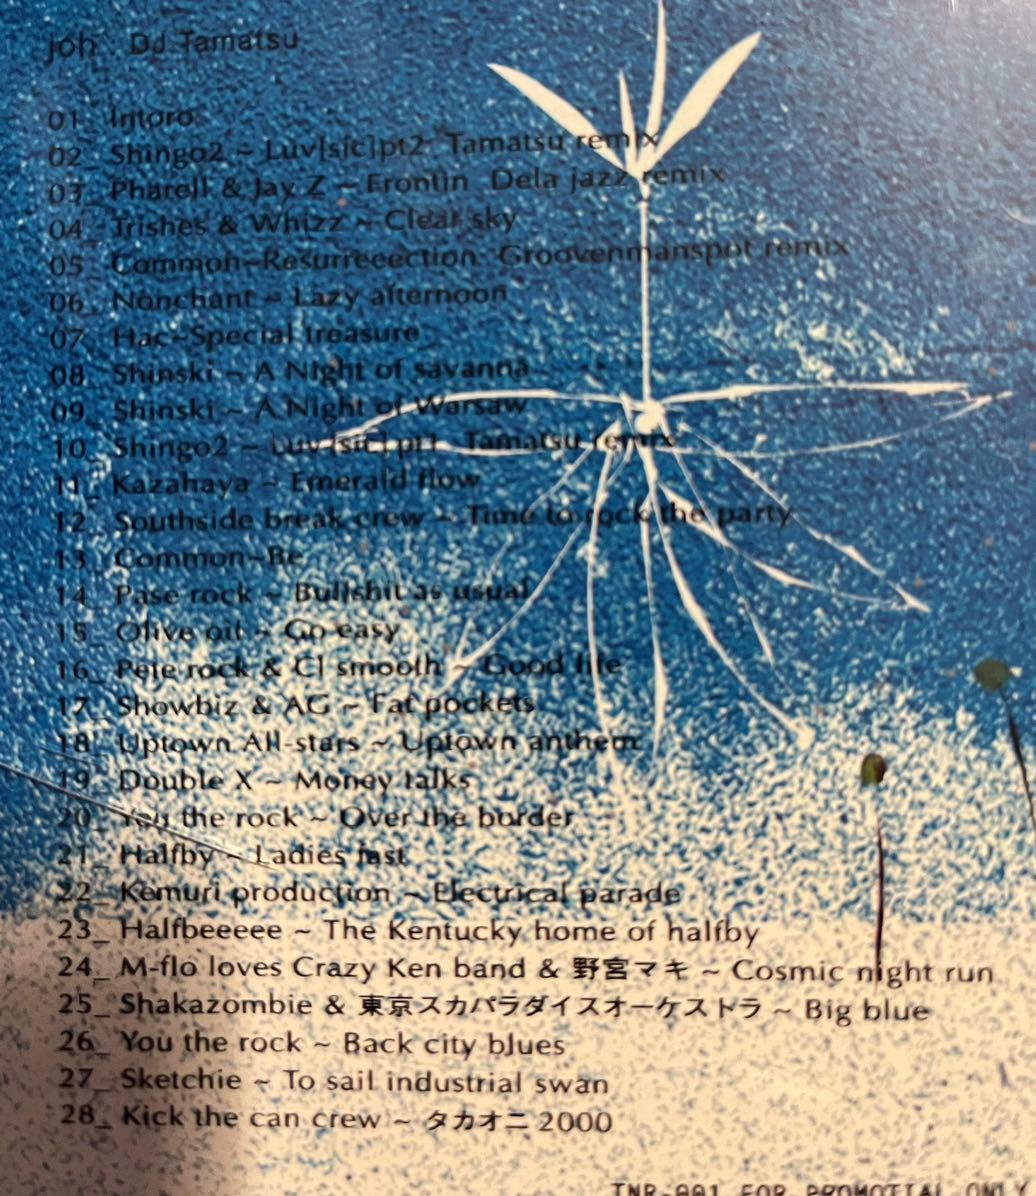 DJ 田松 常 /　mixCD mix cd shingo2 common showbiz HALFBY you the rock kick the can crew olive oil punpee クボタタケシ nujabes_画像4